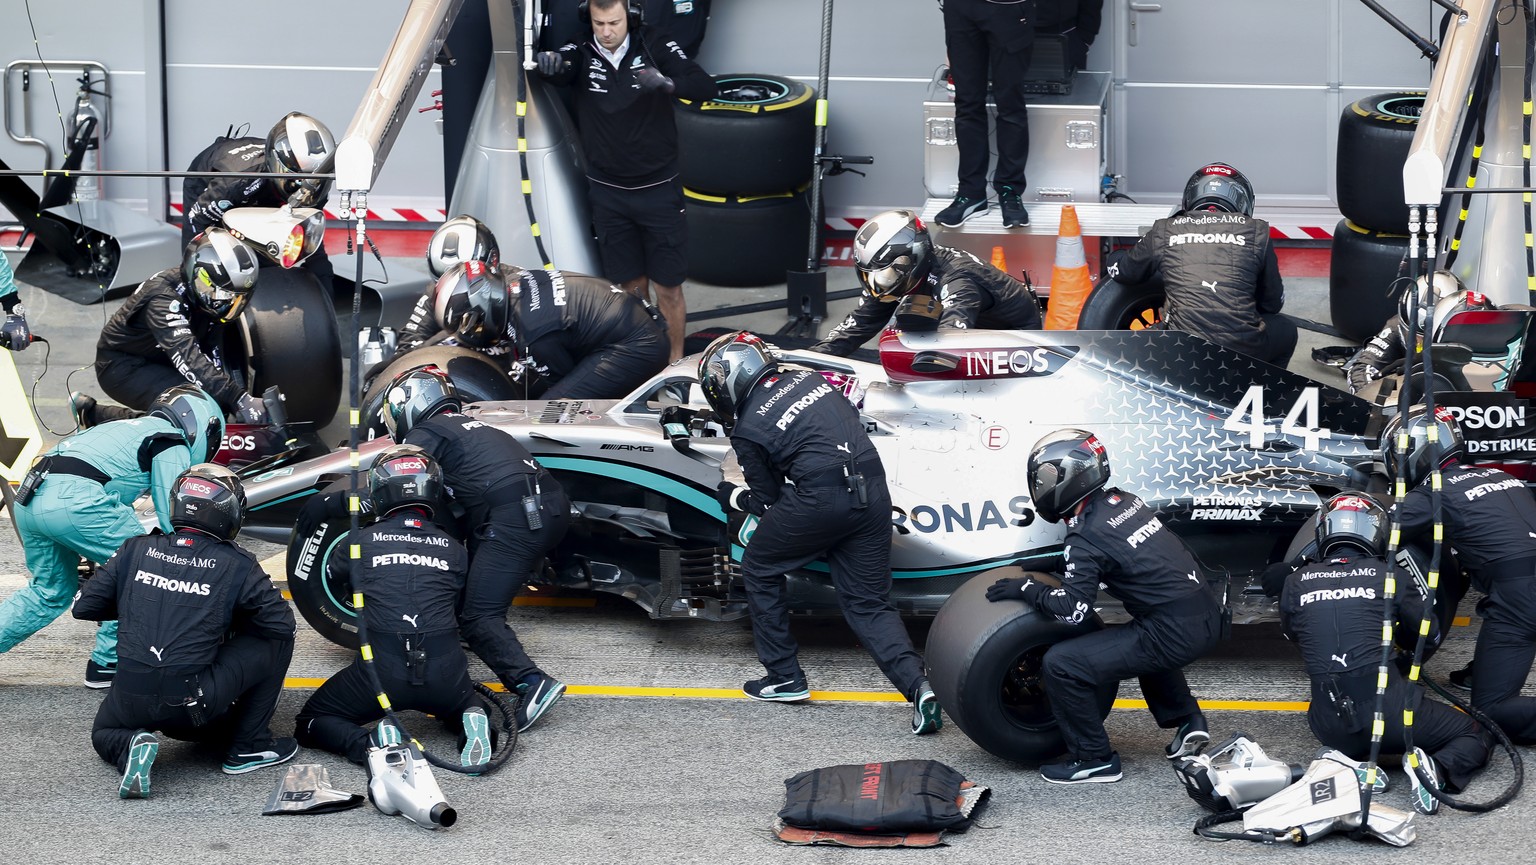 Mercedes-AMG Petronas&#039; Lewis Hamilton makes a pit stop during a Formula One pre-season testing session at the Barcelona Catalunya racetrack in Montmelo, outside Barcelona, Spain, Wednesday, Feb.  ...